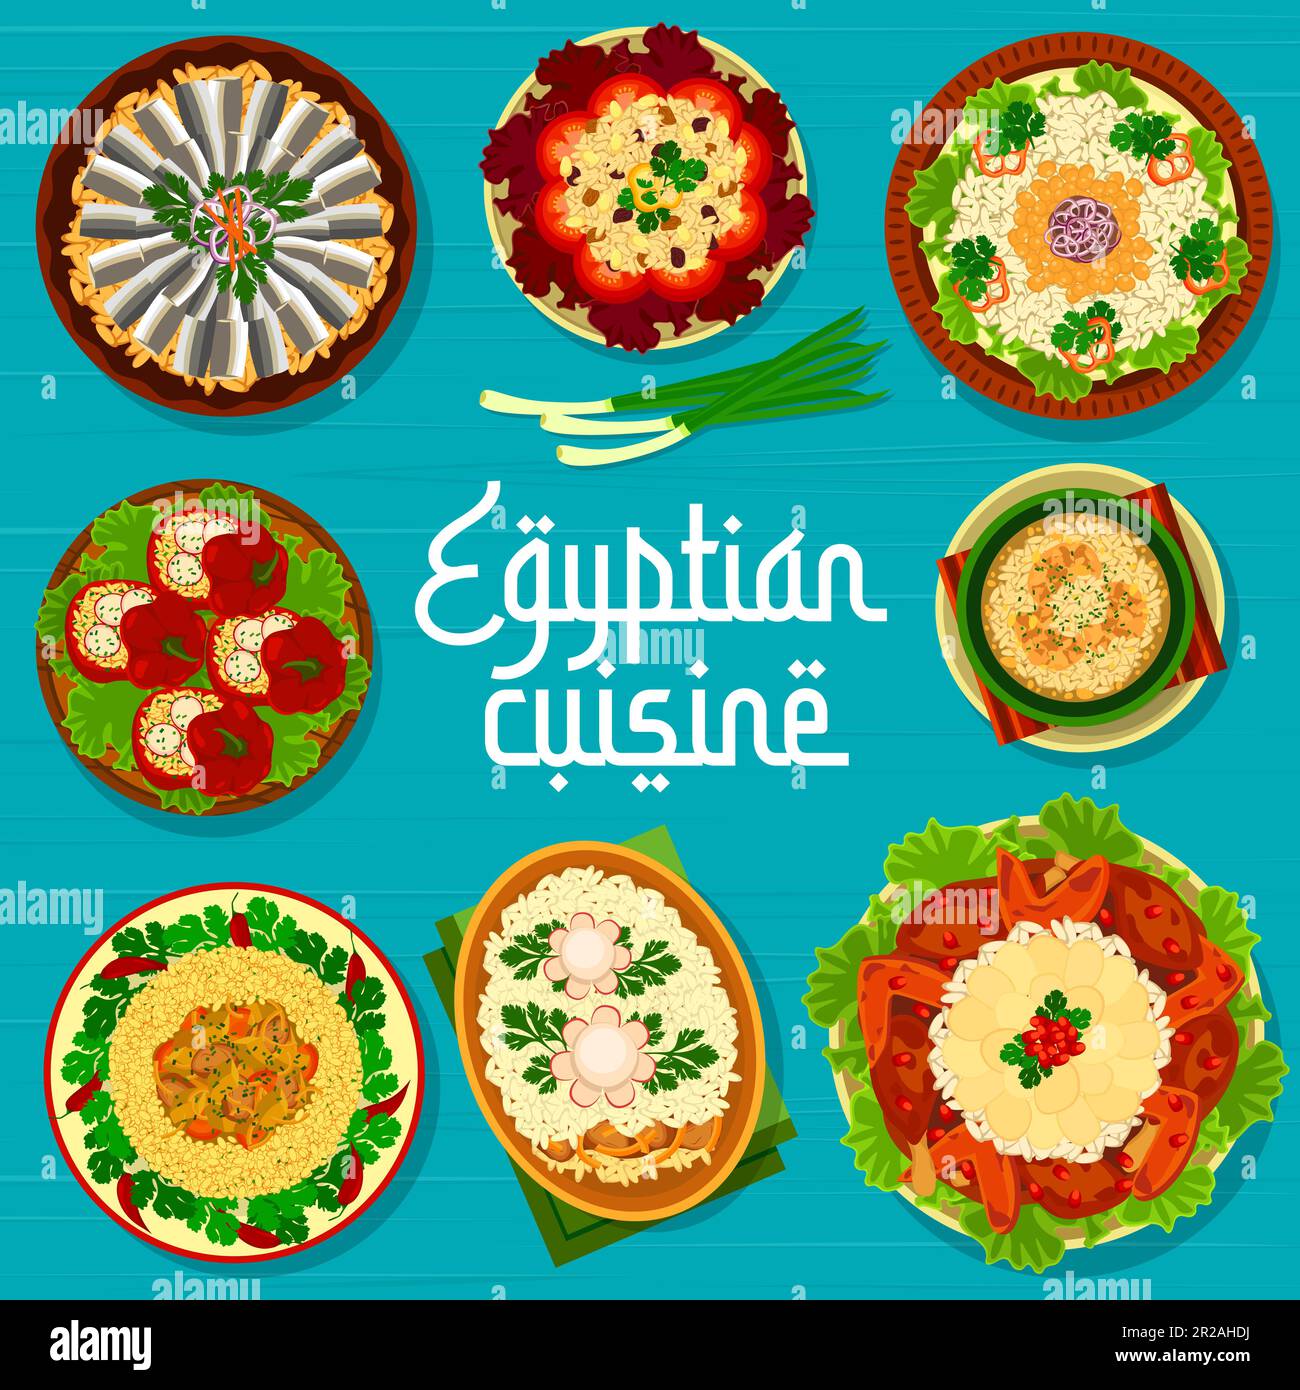 Egyptian cuisine restaurant menu cover, Egypt food dishes and meals, vector poster. Egyptian cuisine traditional lunch and dinner soup, pilaf rice and couscous with lamb or chicken, lentils and tomato Stock Vector